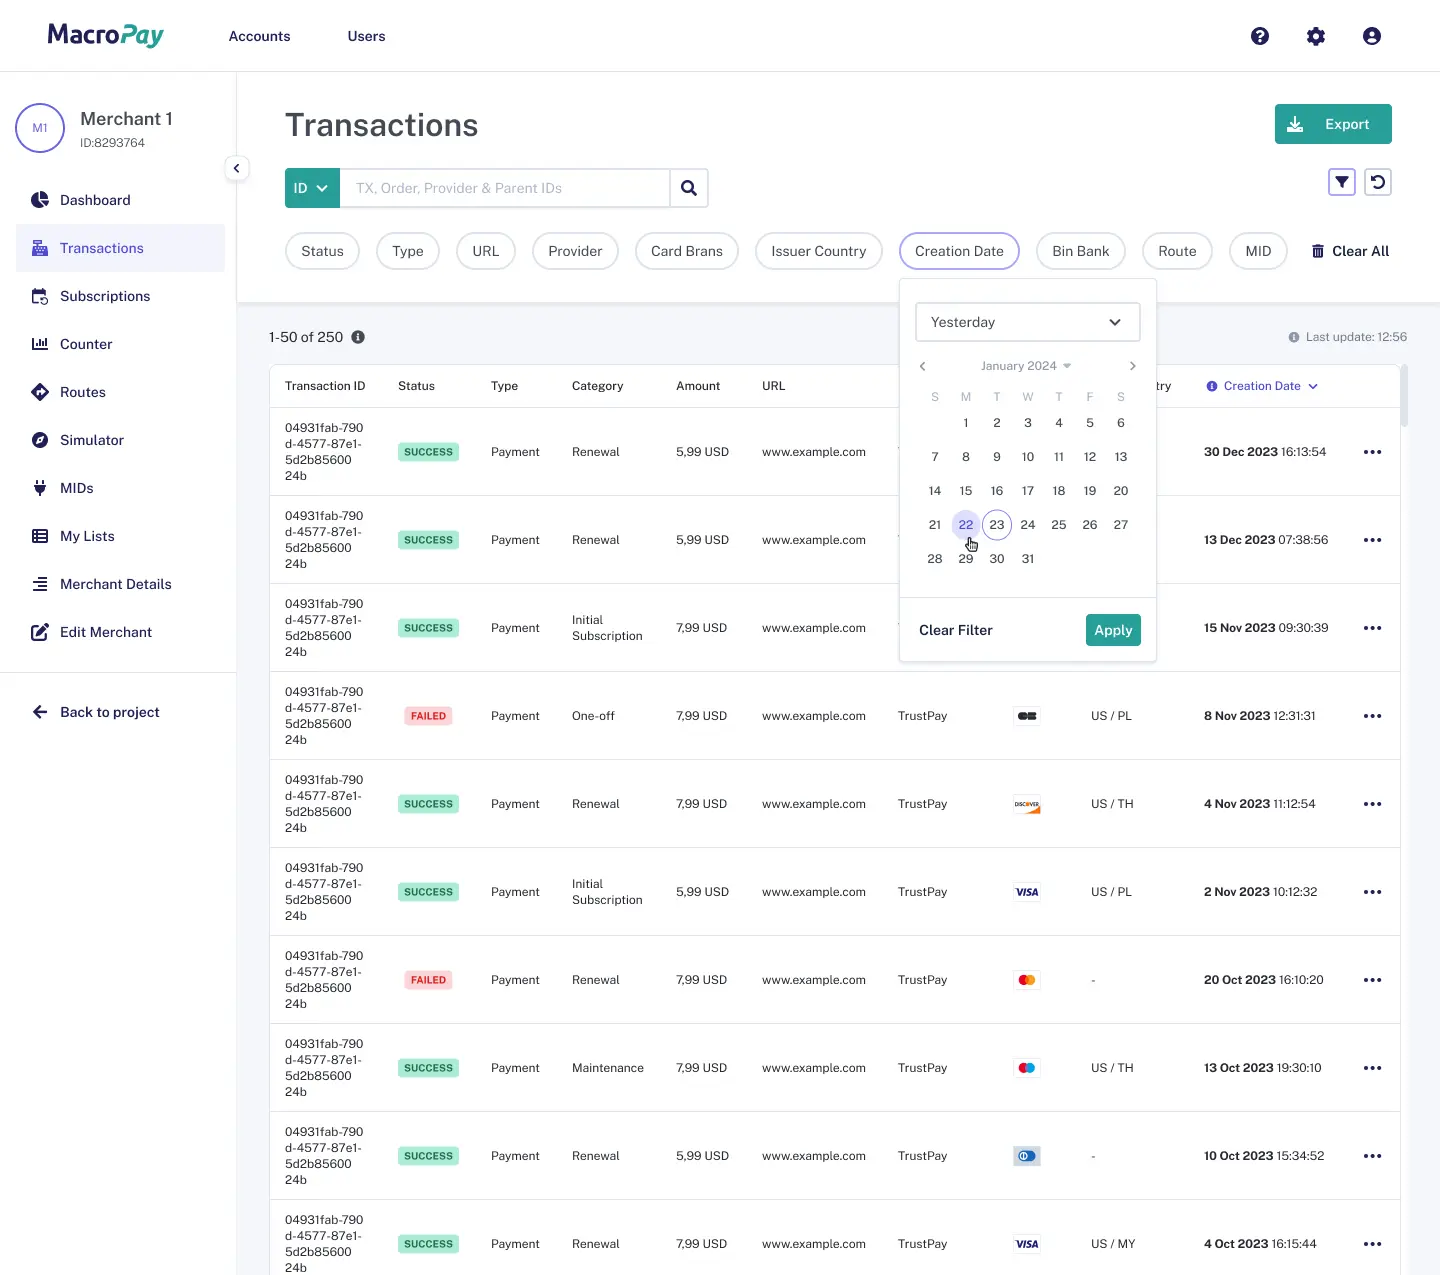 The transactions table inside the Macropay platform shows the diverse type of filters it has.